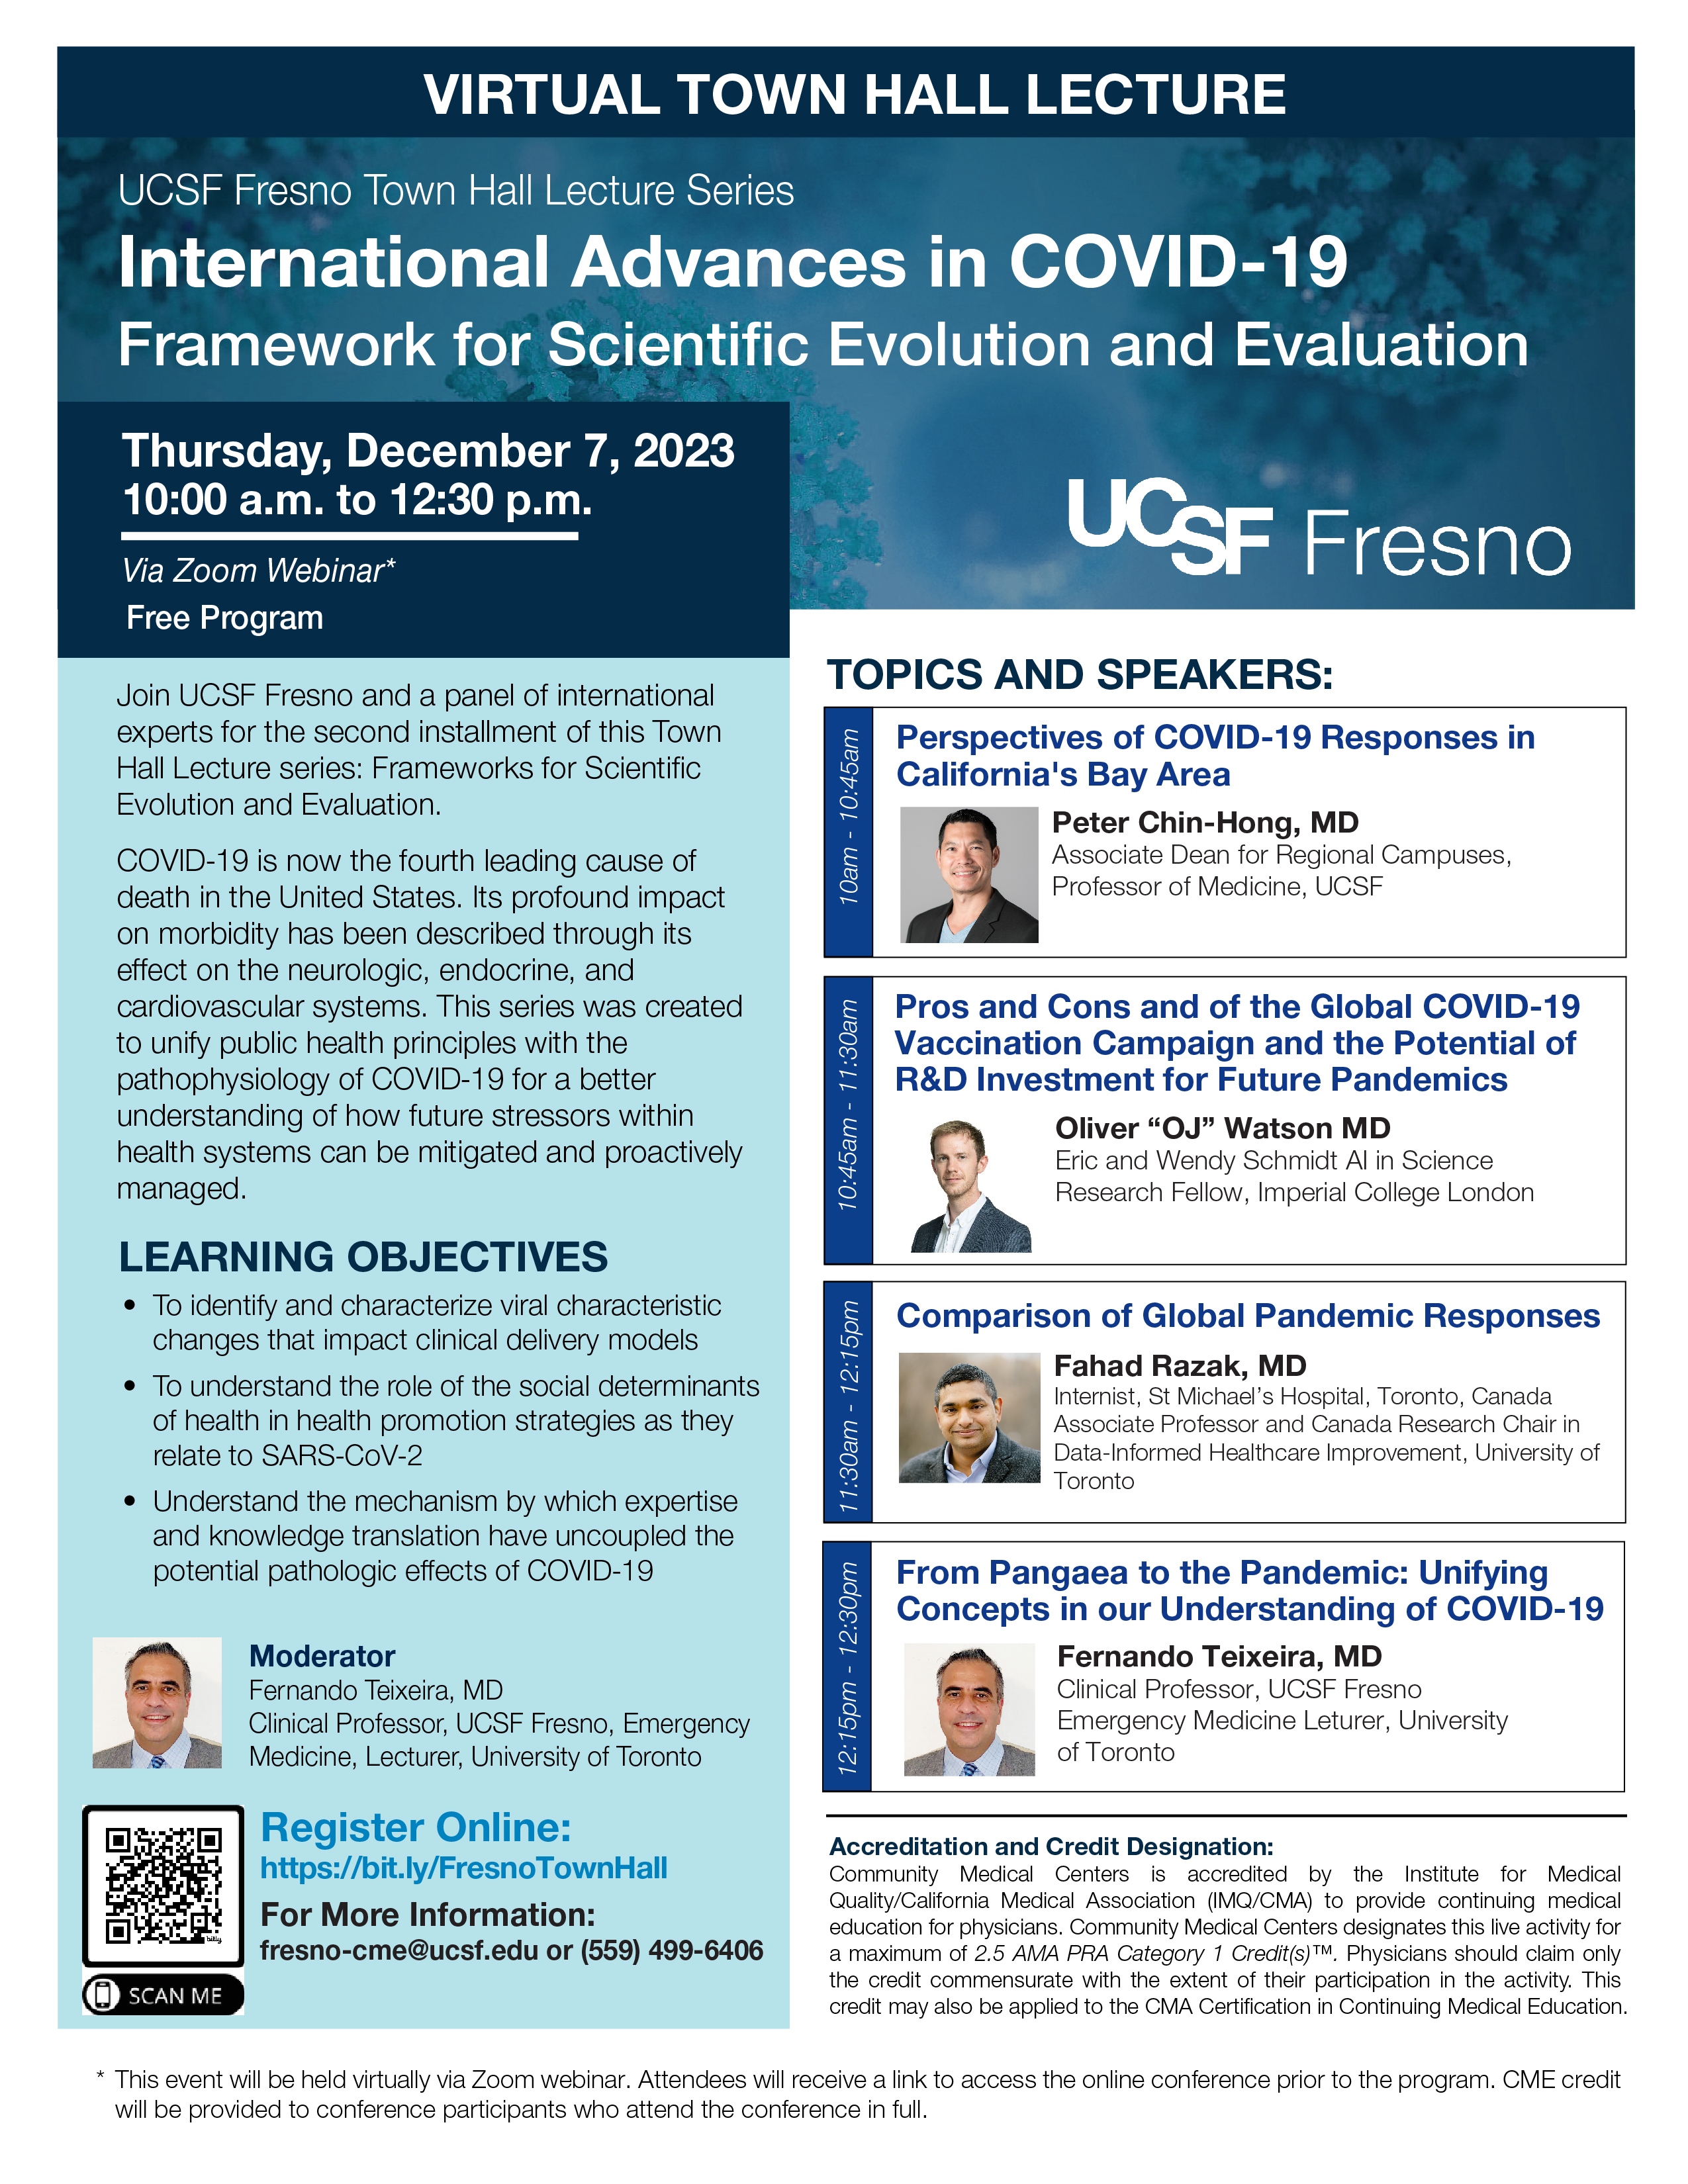 International Advances in COVD-19 Townhall Flyer